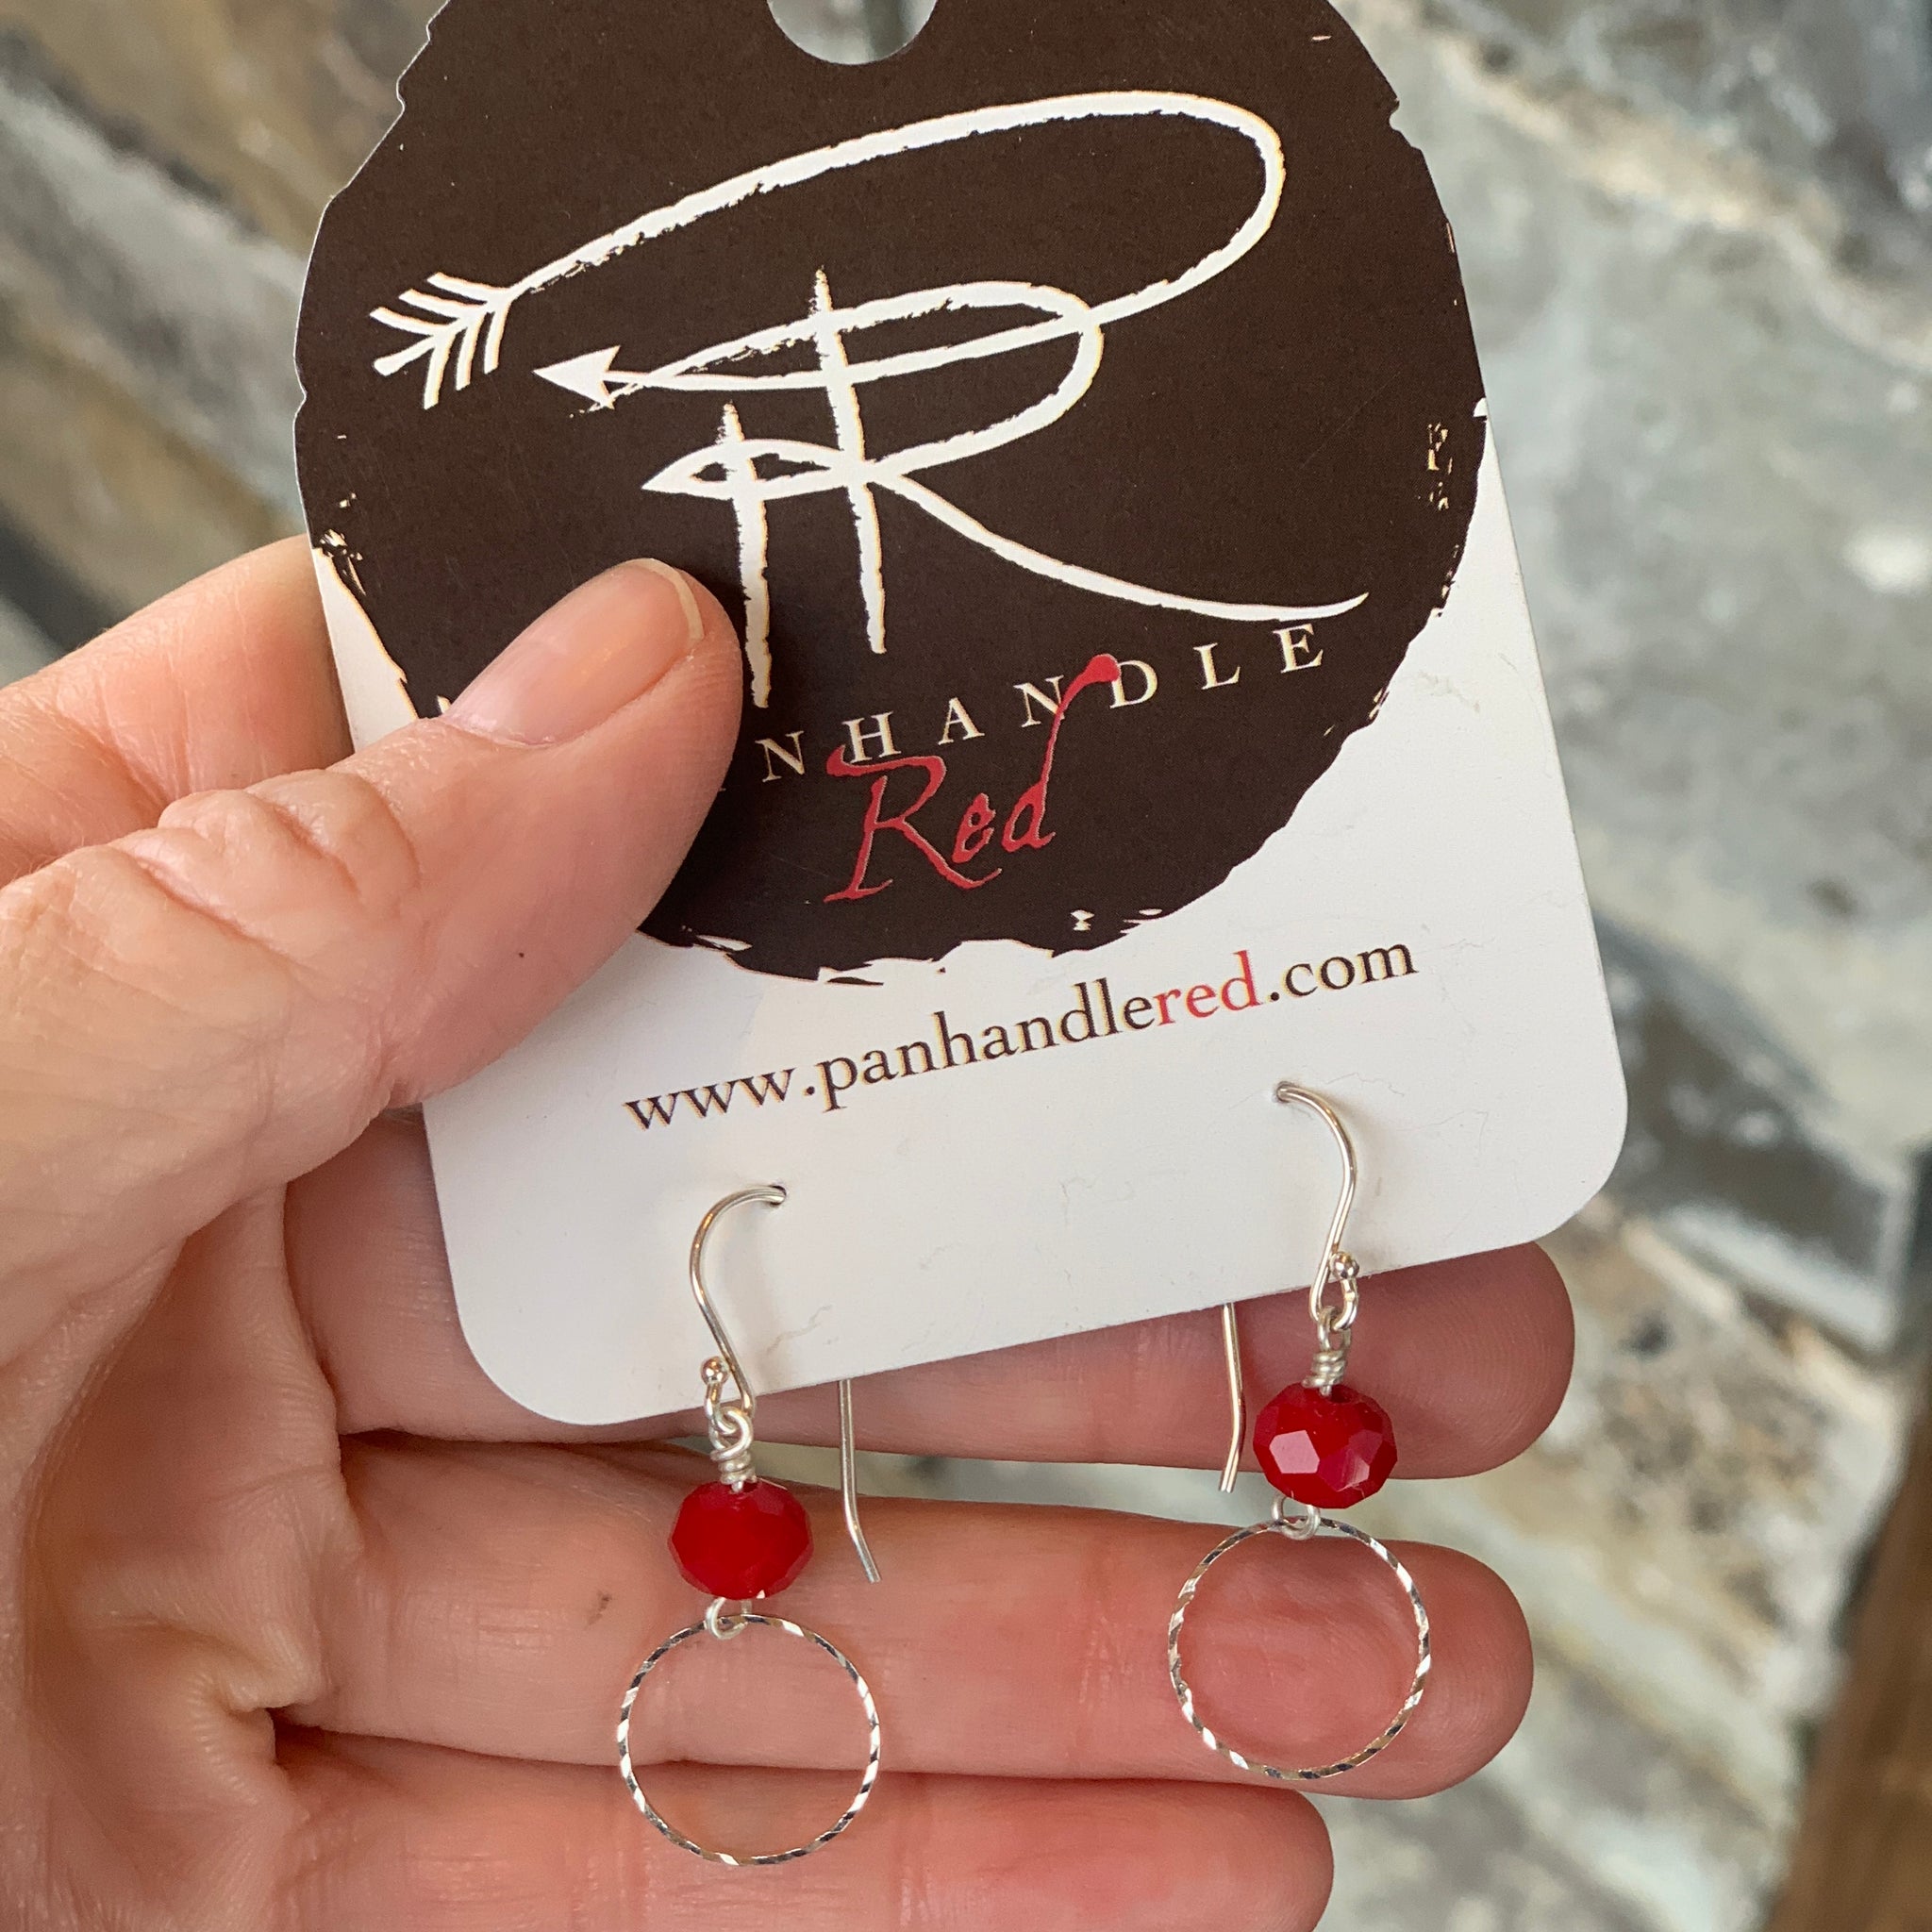 silver earrings jewelry store shop retail western chic designer silo event venue coeur d'alene idaho red jewelry 